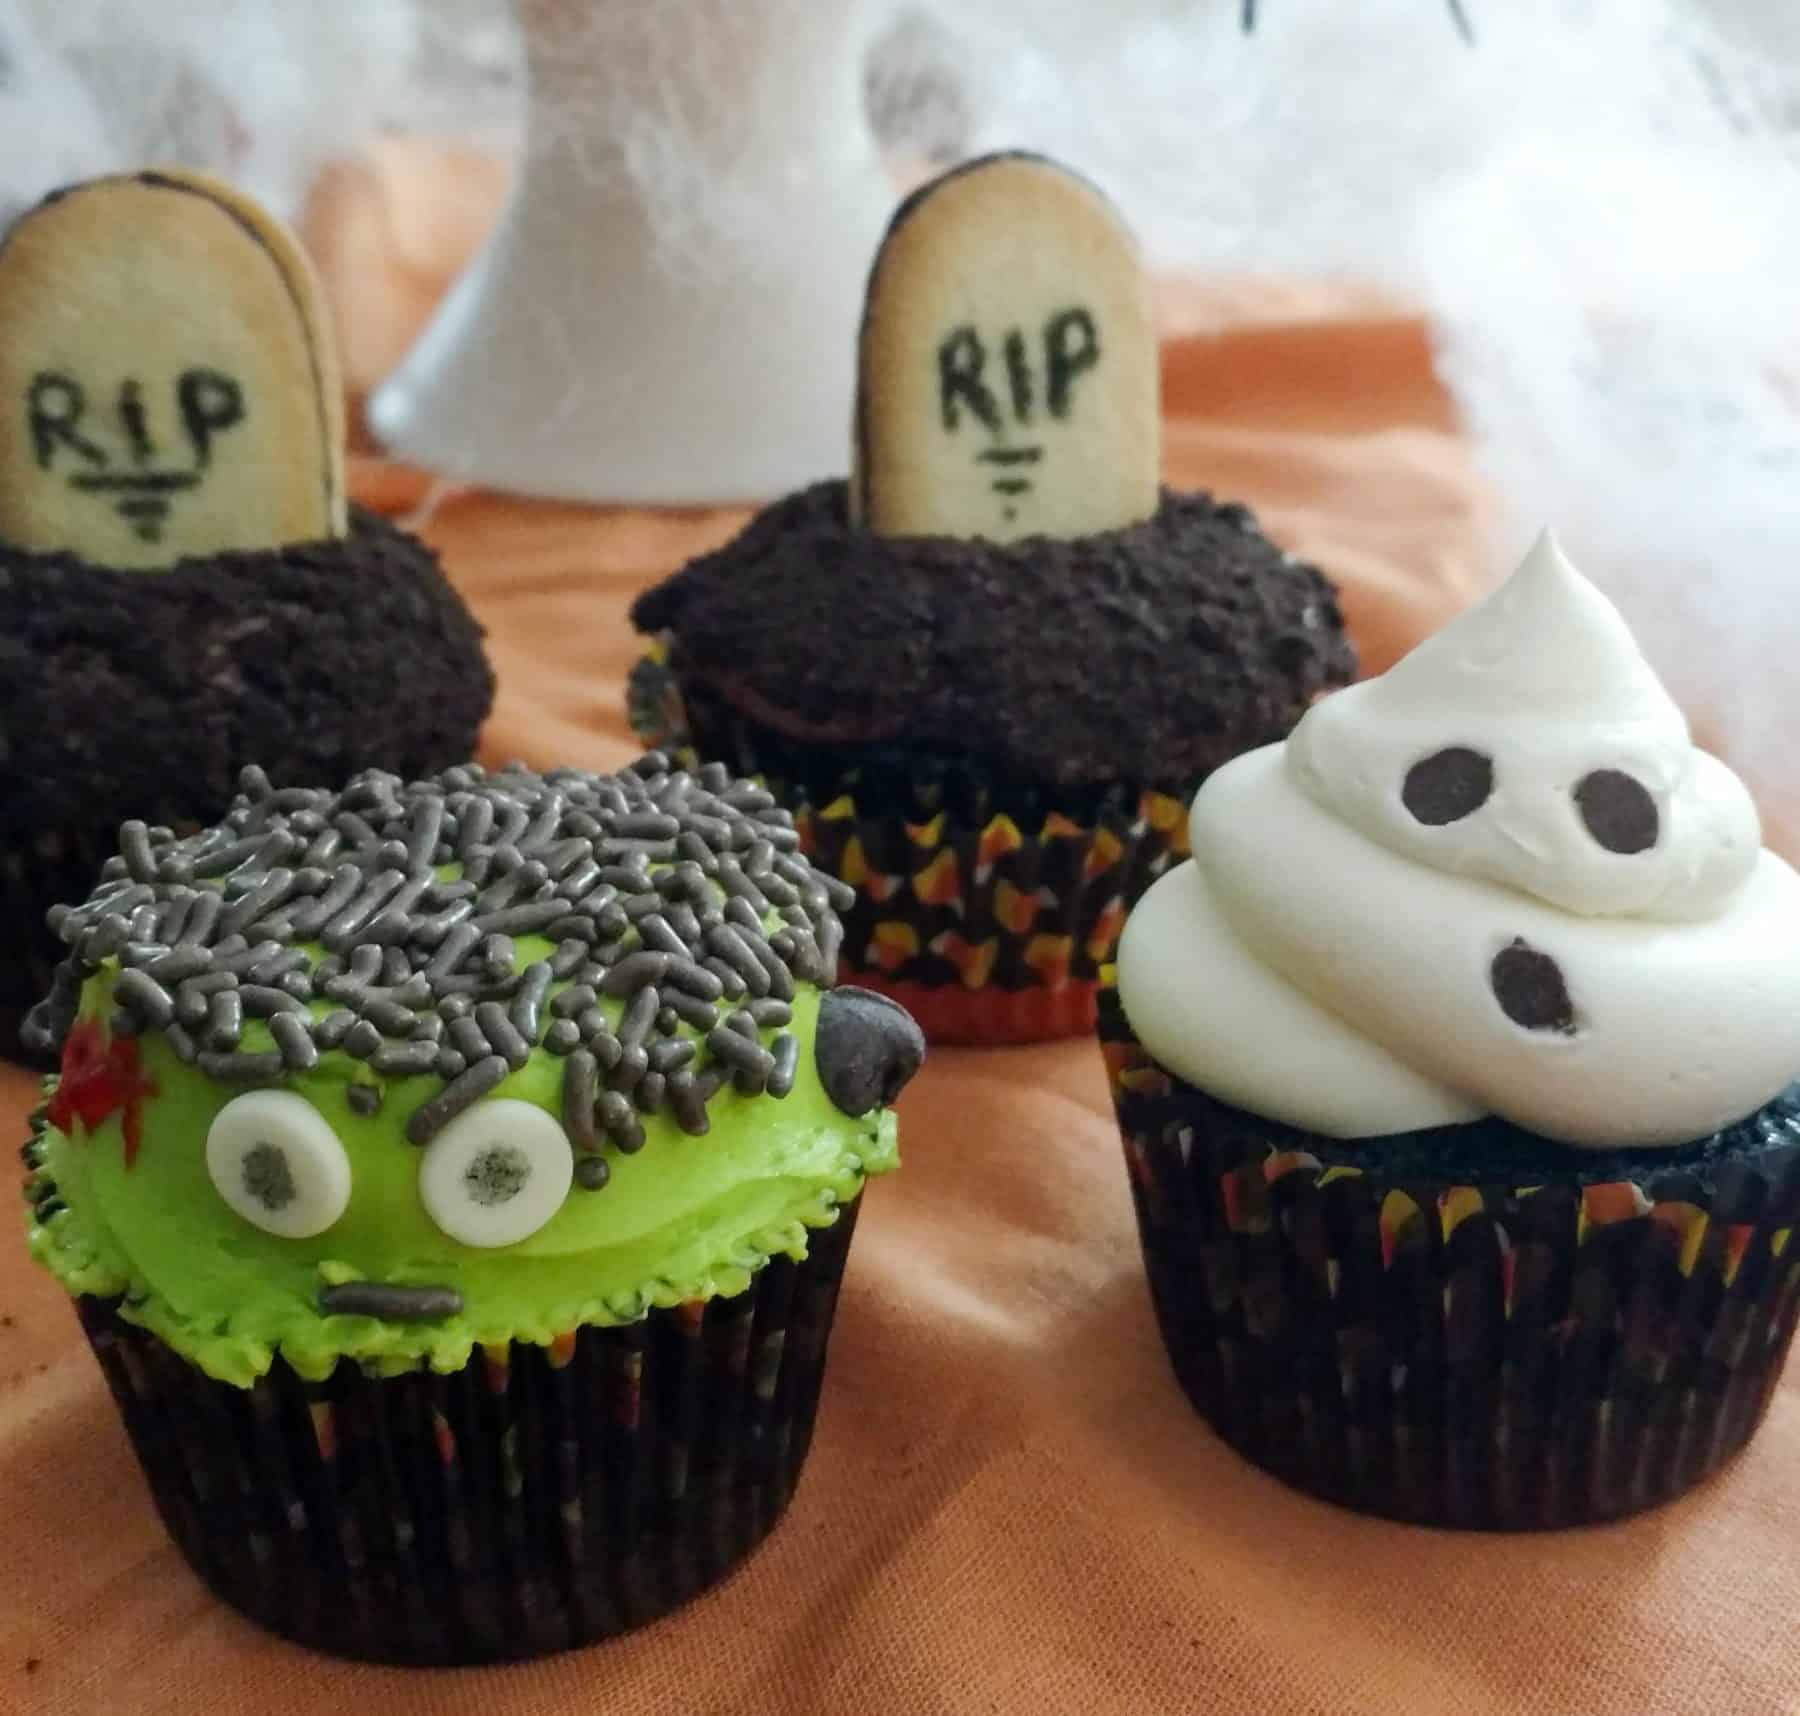 Cupcakes decorated for Halloween. One looks like Frankenstein and another looks like a ghost